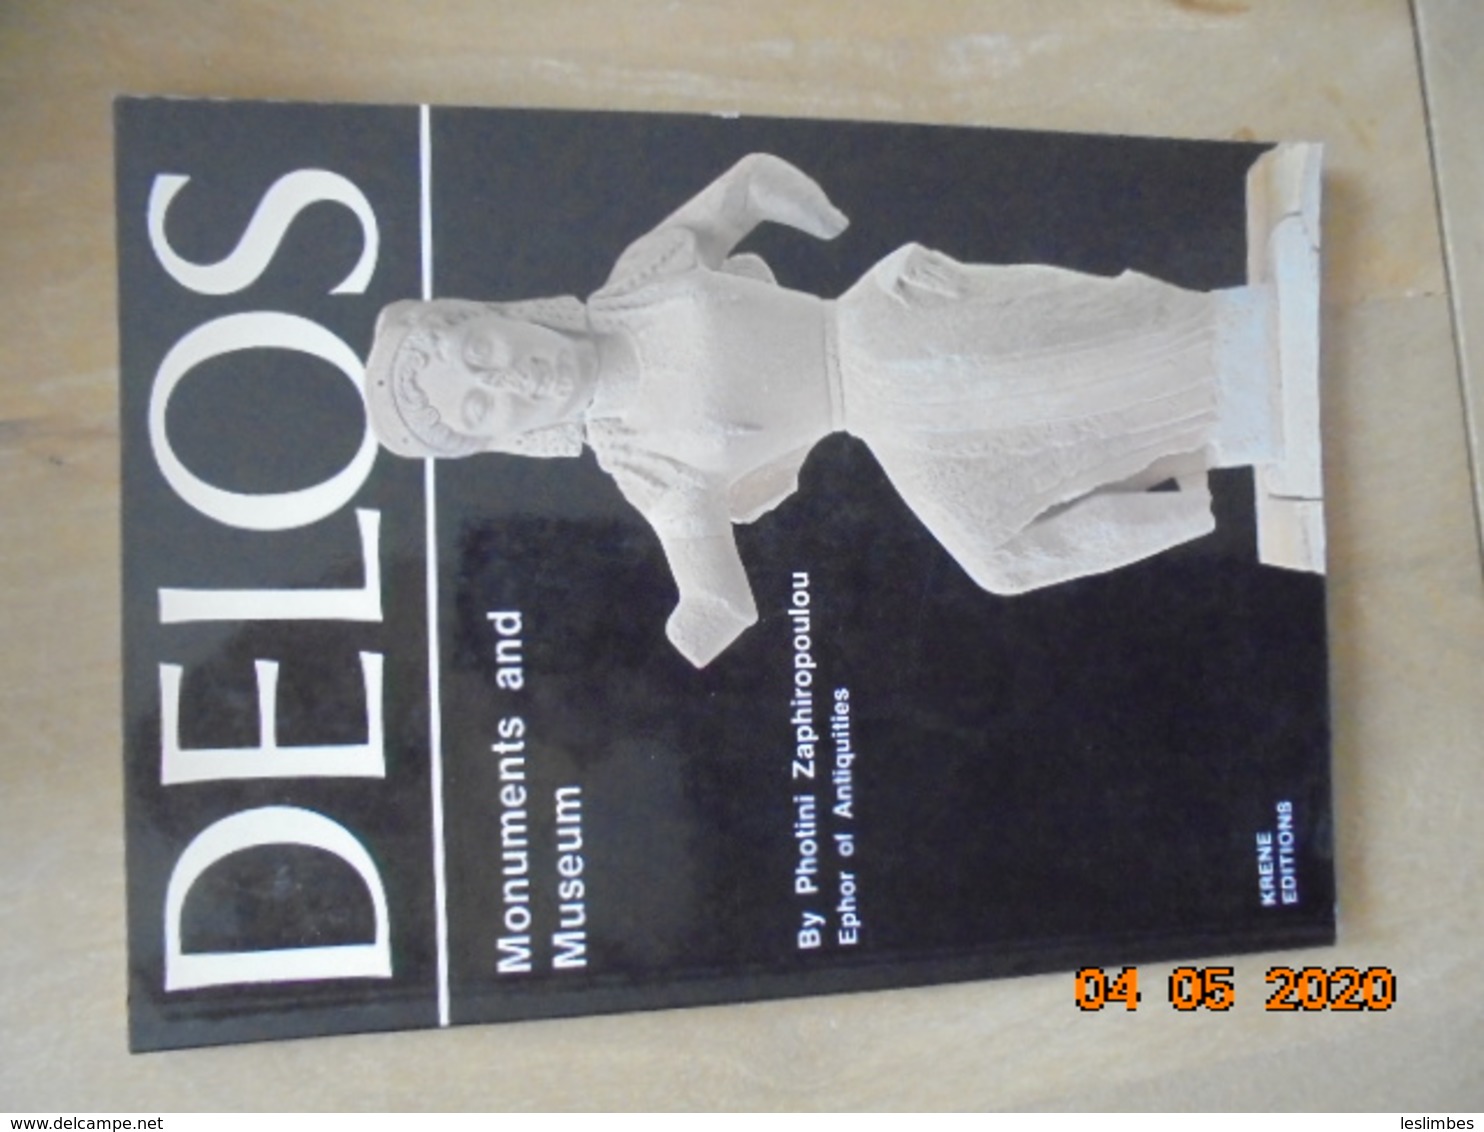 Delos: Monuments And Museum By Photini Zaphiropoulou. Krene Editions, 1983. Greece - Reizen/ Ontdekking